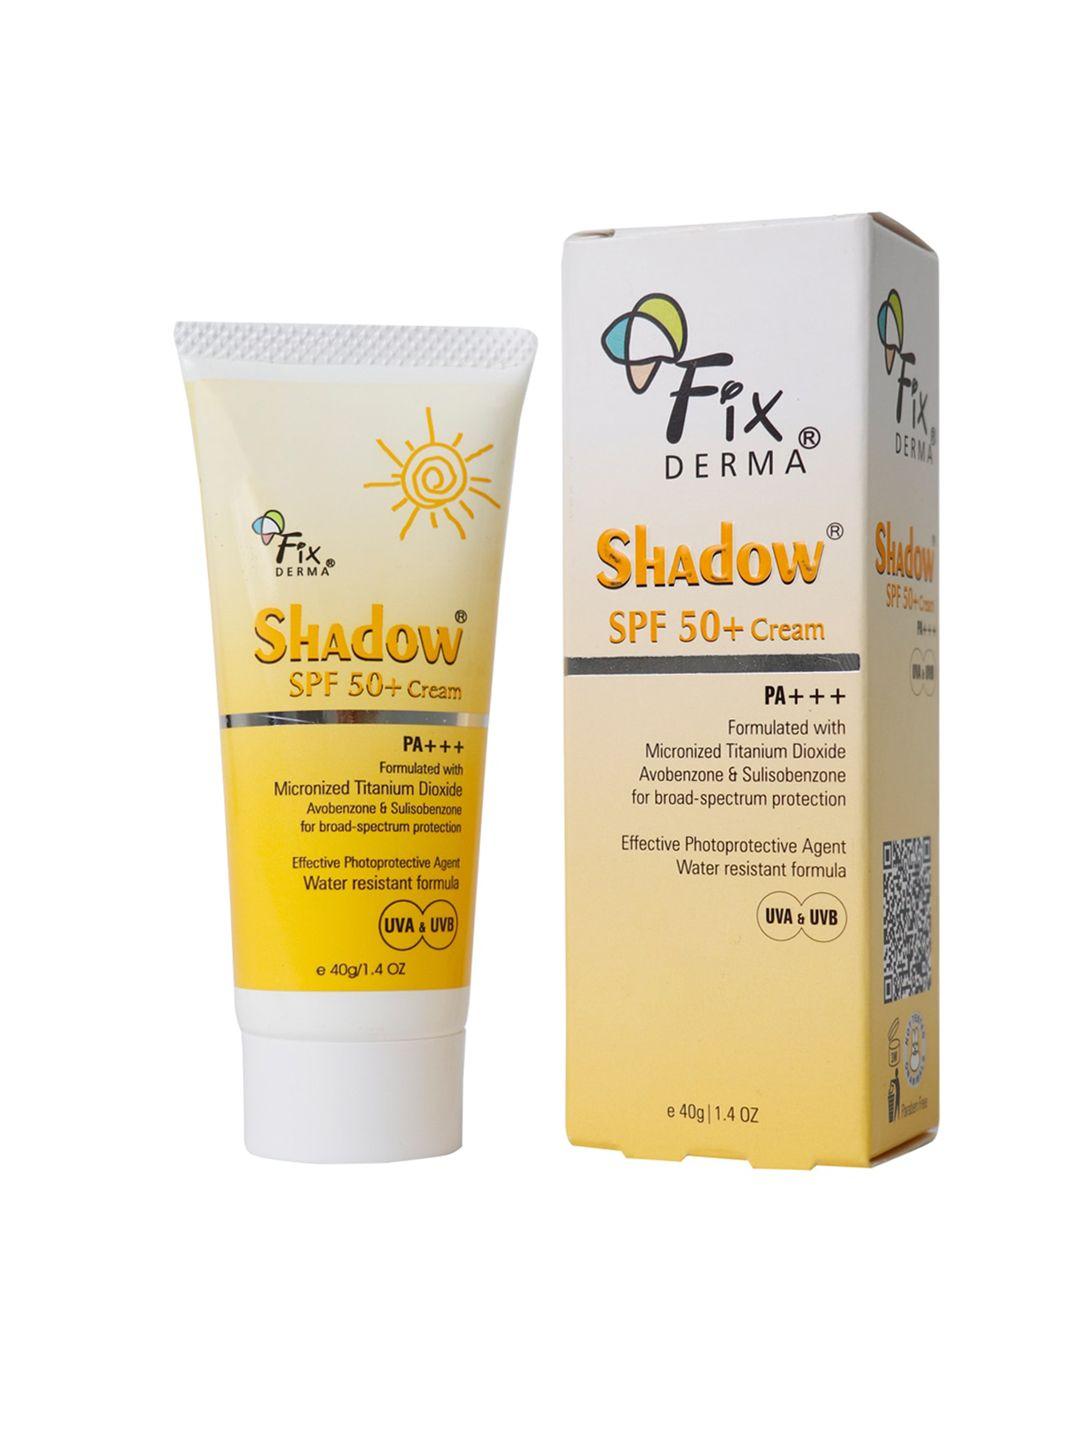 fixderma shadow sunscreen spf 50+ cream for dry skin with pa+++ protection - 40g